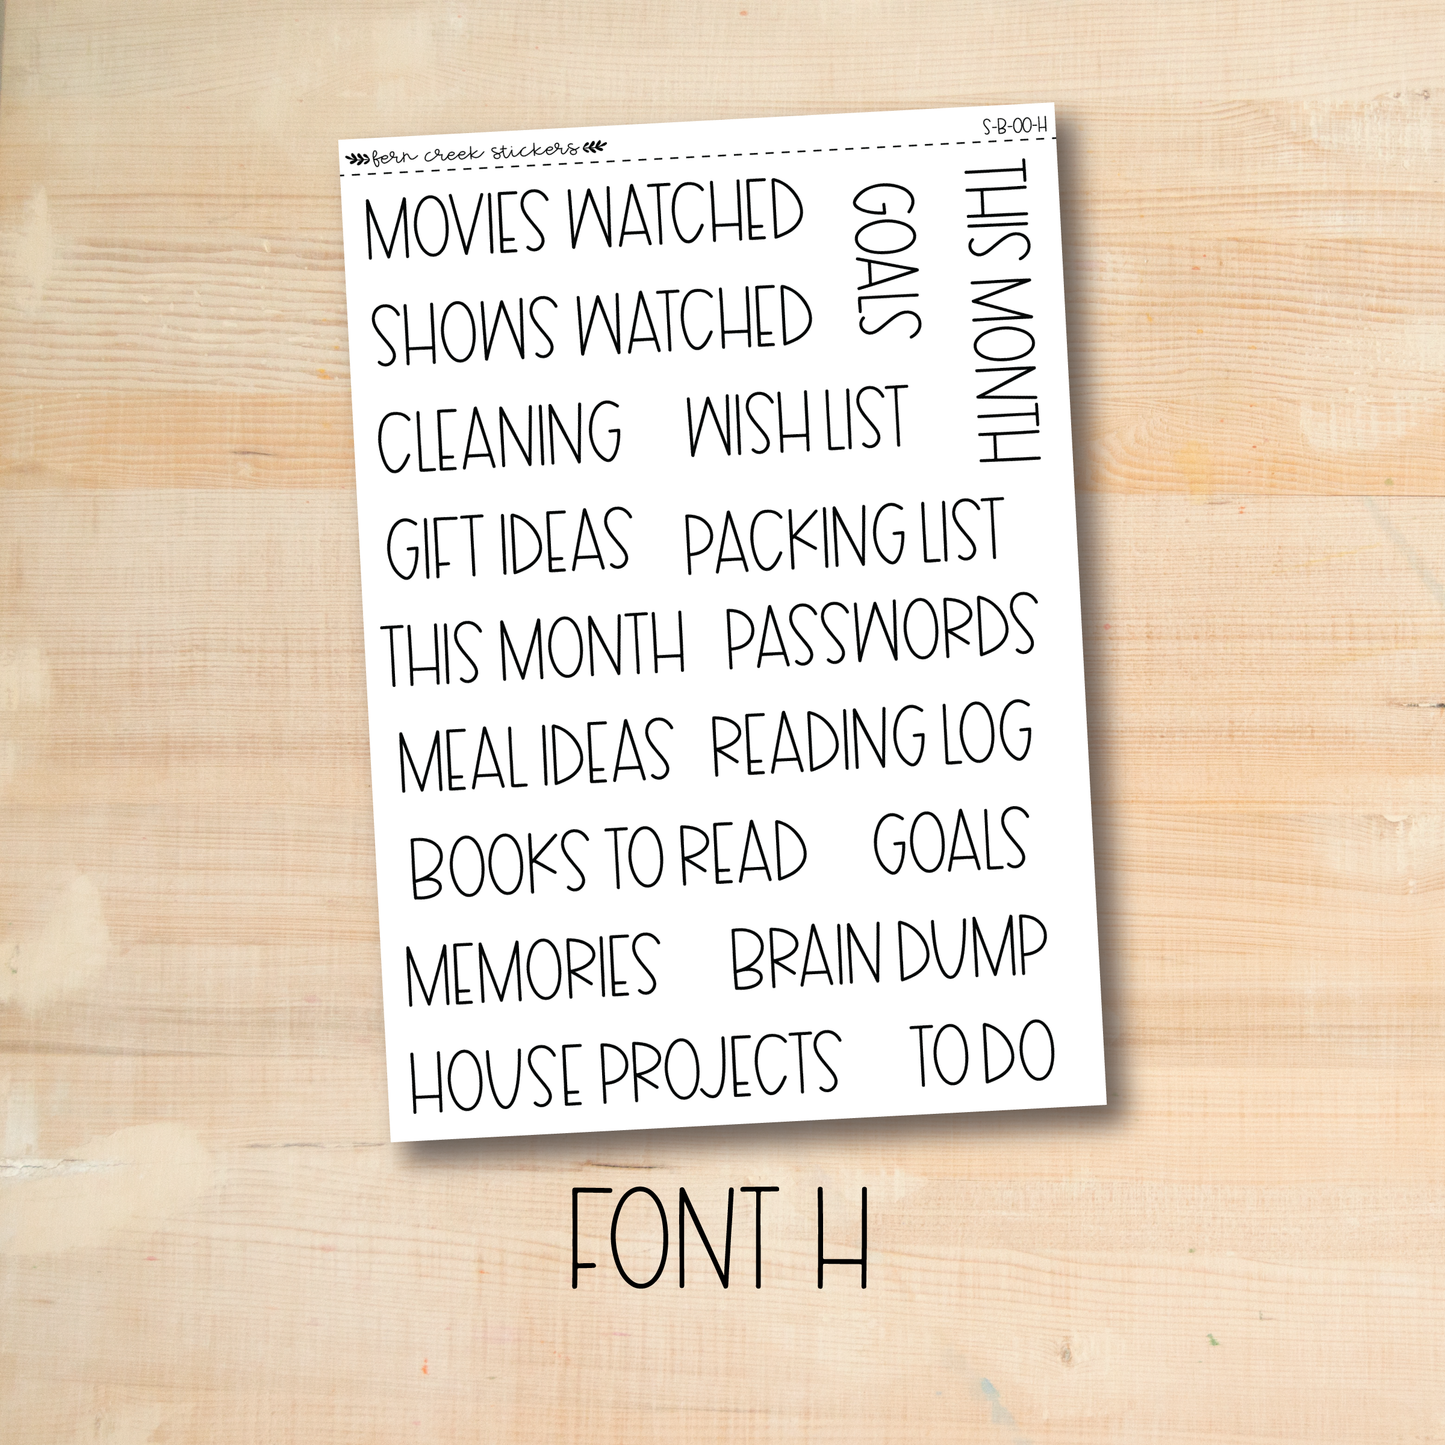 S-B-00 || Mixed notes page header script stickers